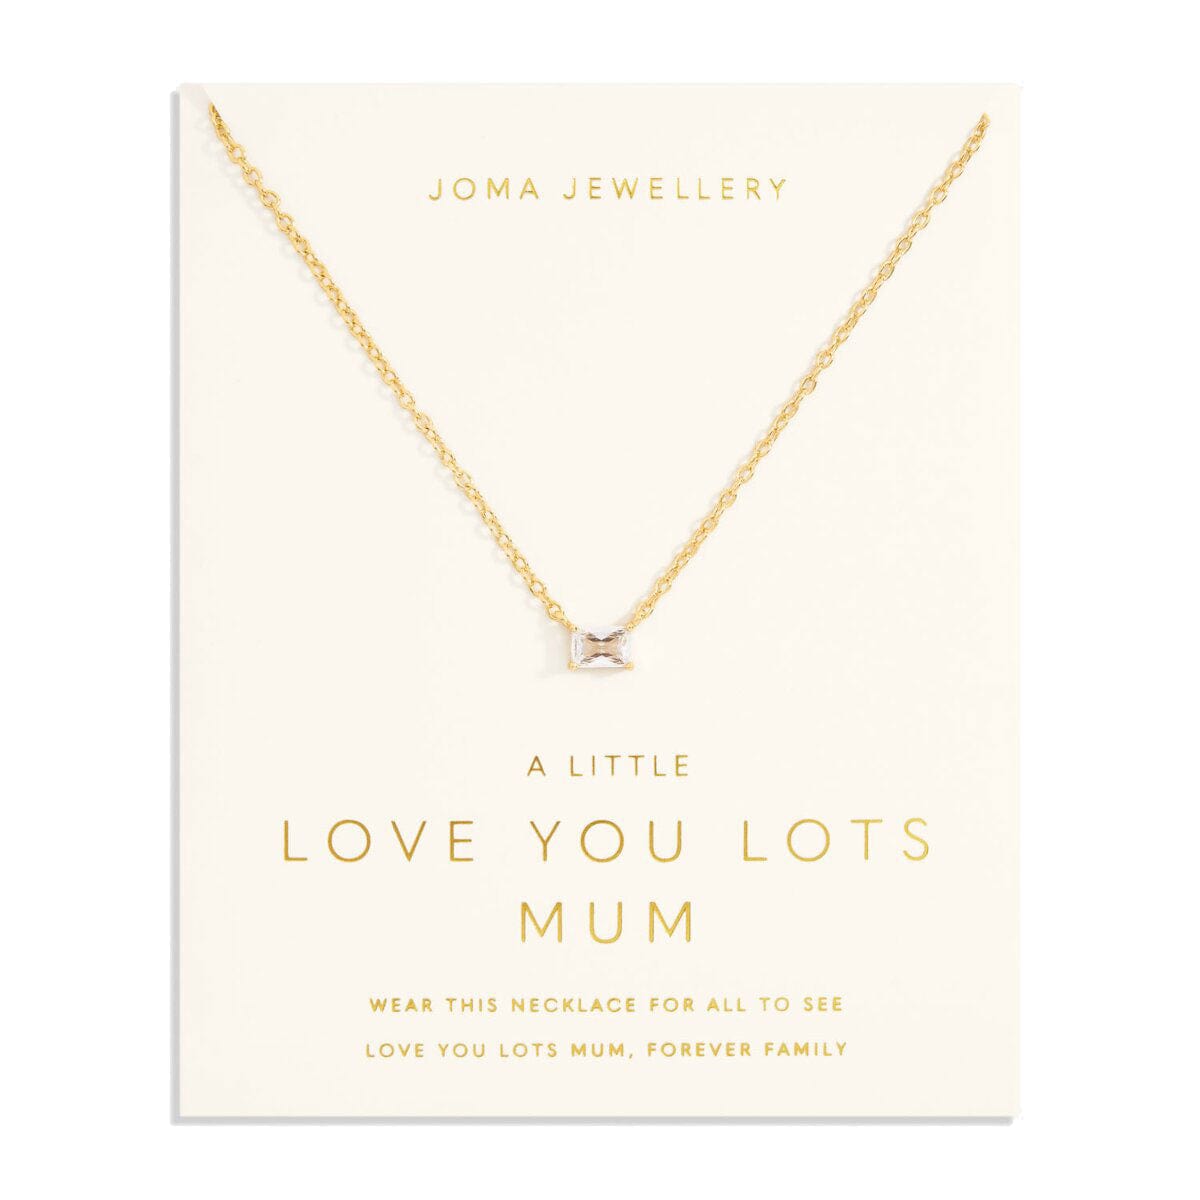 Joma Jewellery Necklace Joma Jewellery A Little Love From Your Little Ones 'Love You Lots Mum' Necklace